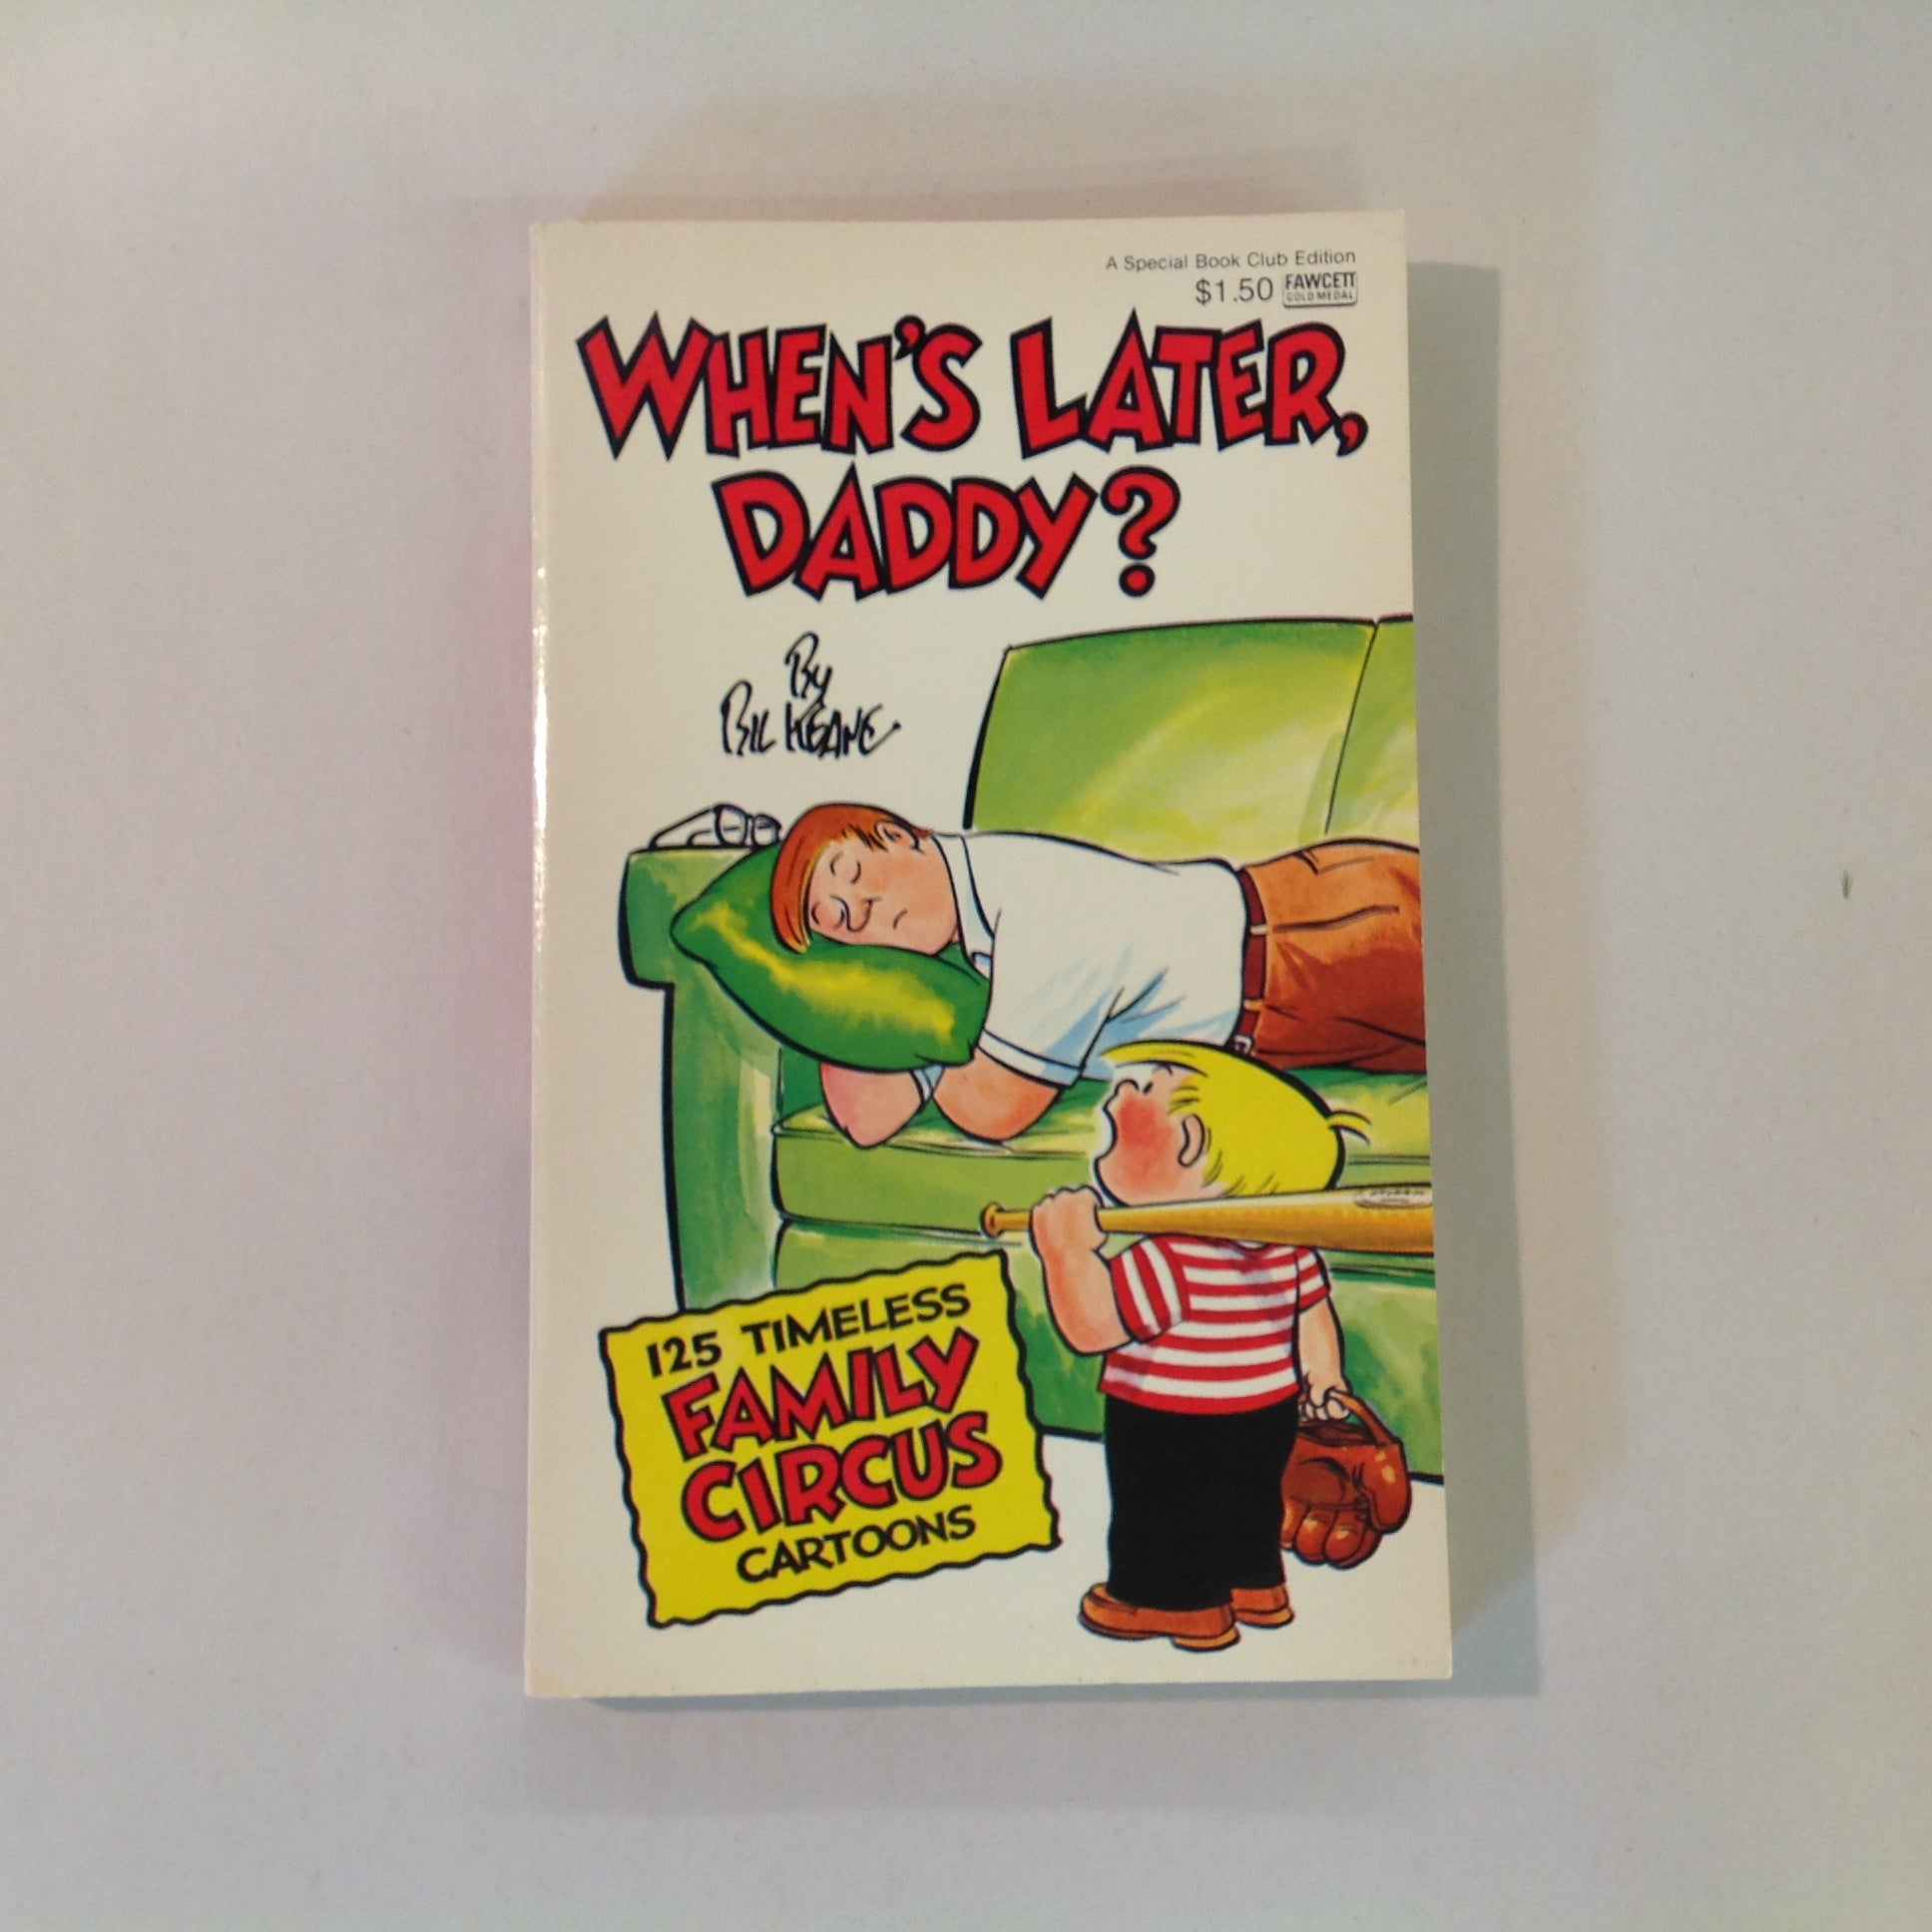 Vintage 1974 Mass Market Paperback WHEN'S LATER, DADDY? 125 Timeless FAMILY CIRCUS Cartoons Bil Keane